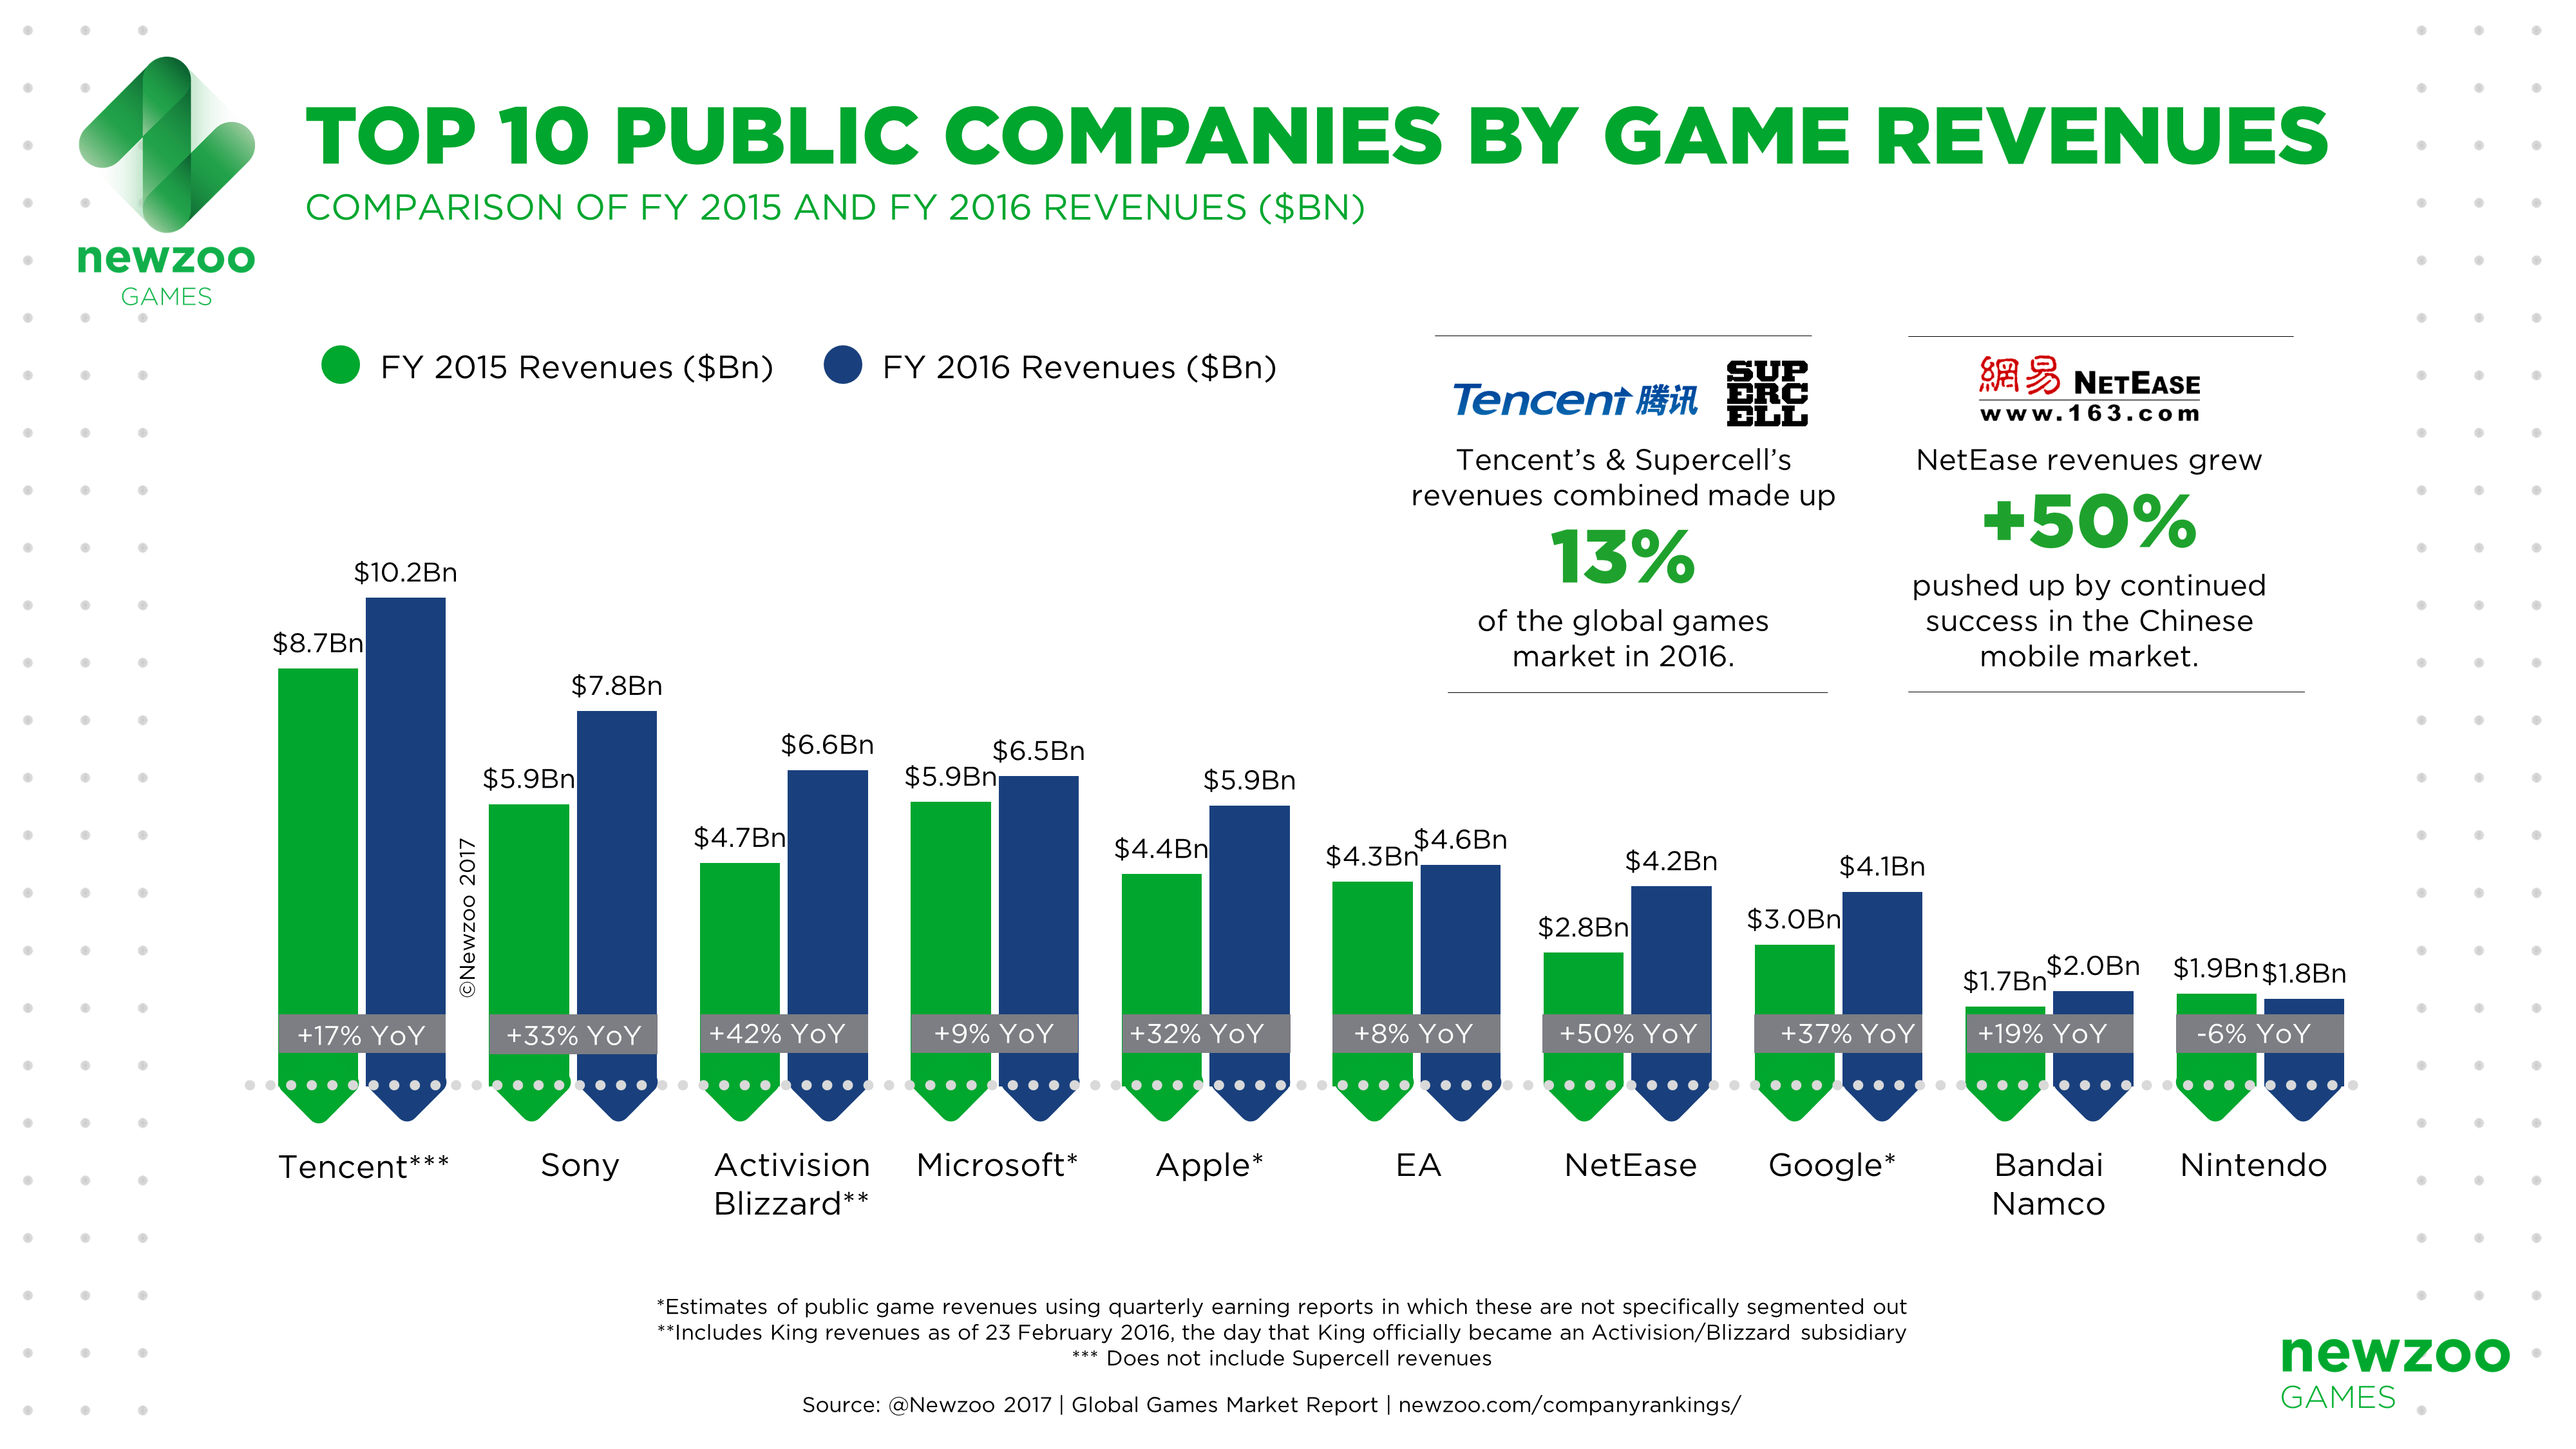 Newzoo_Top_10_Companies_Game_Revenues_FY2016 (1).png